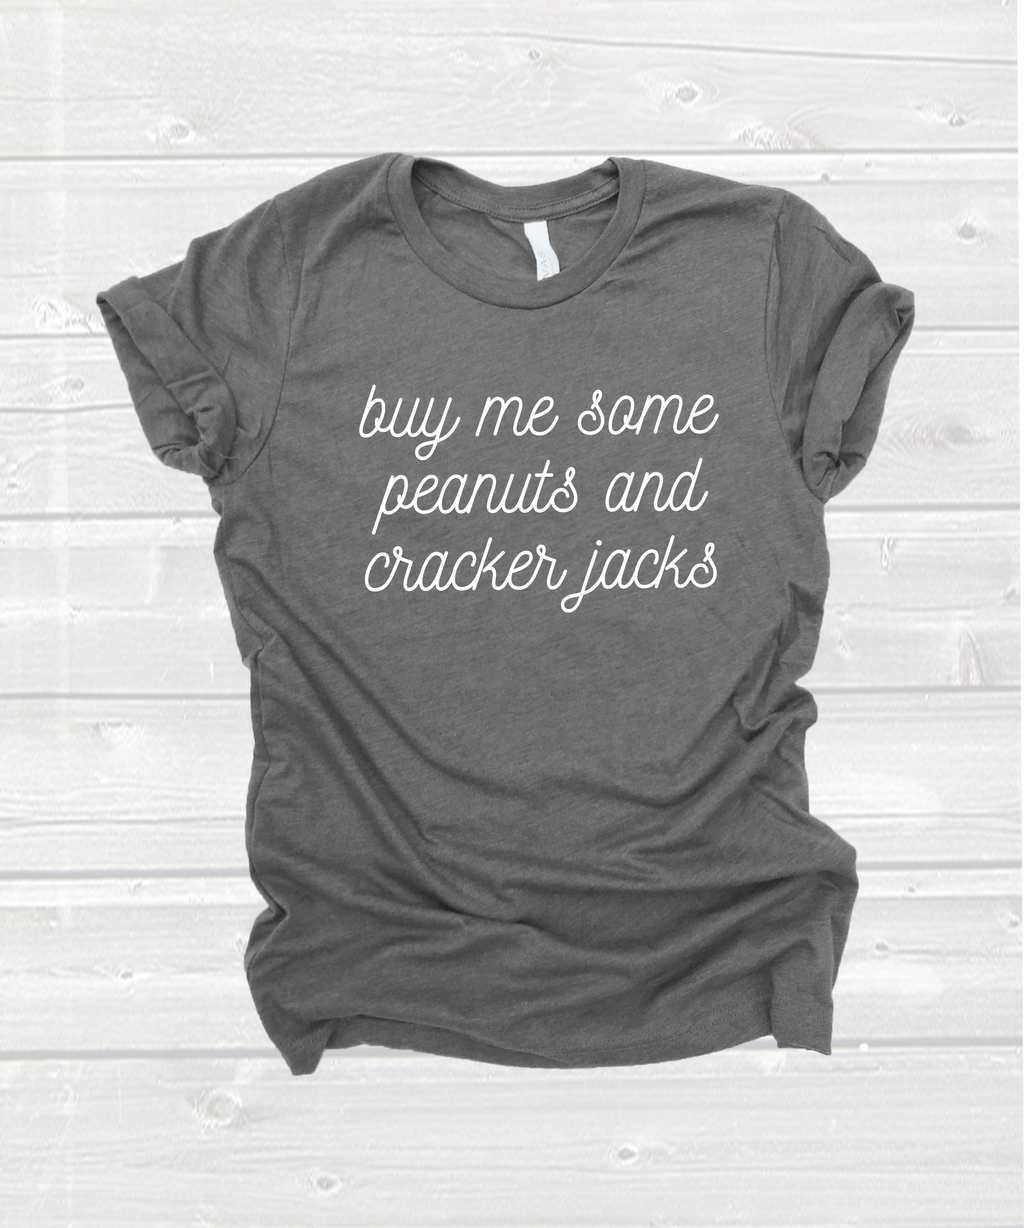 "buy me some peanuts and cracker jacks" tee in heather grey